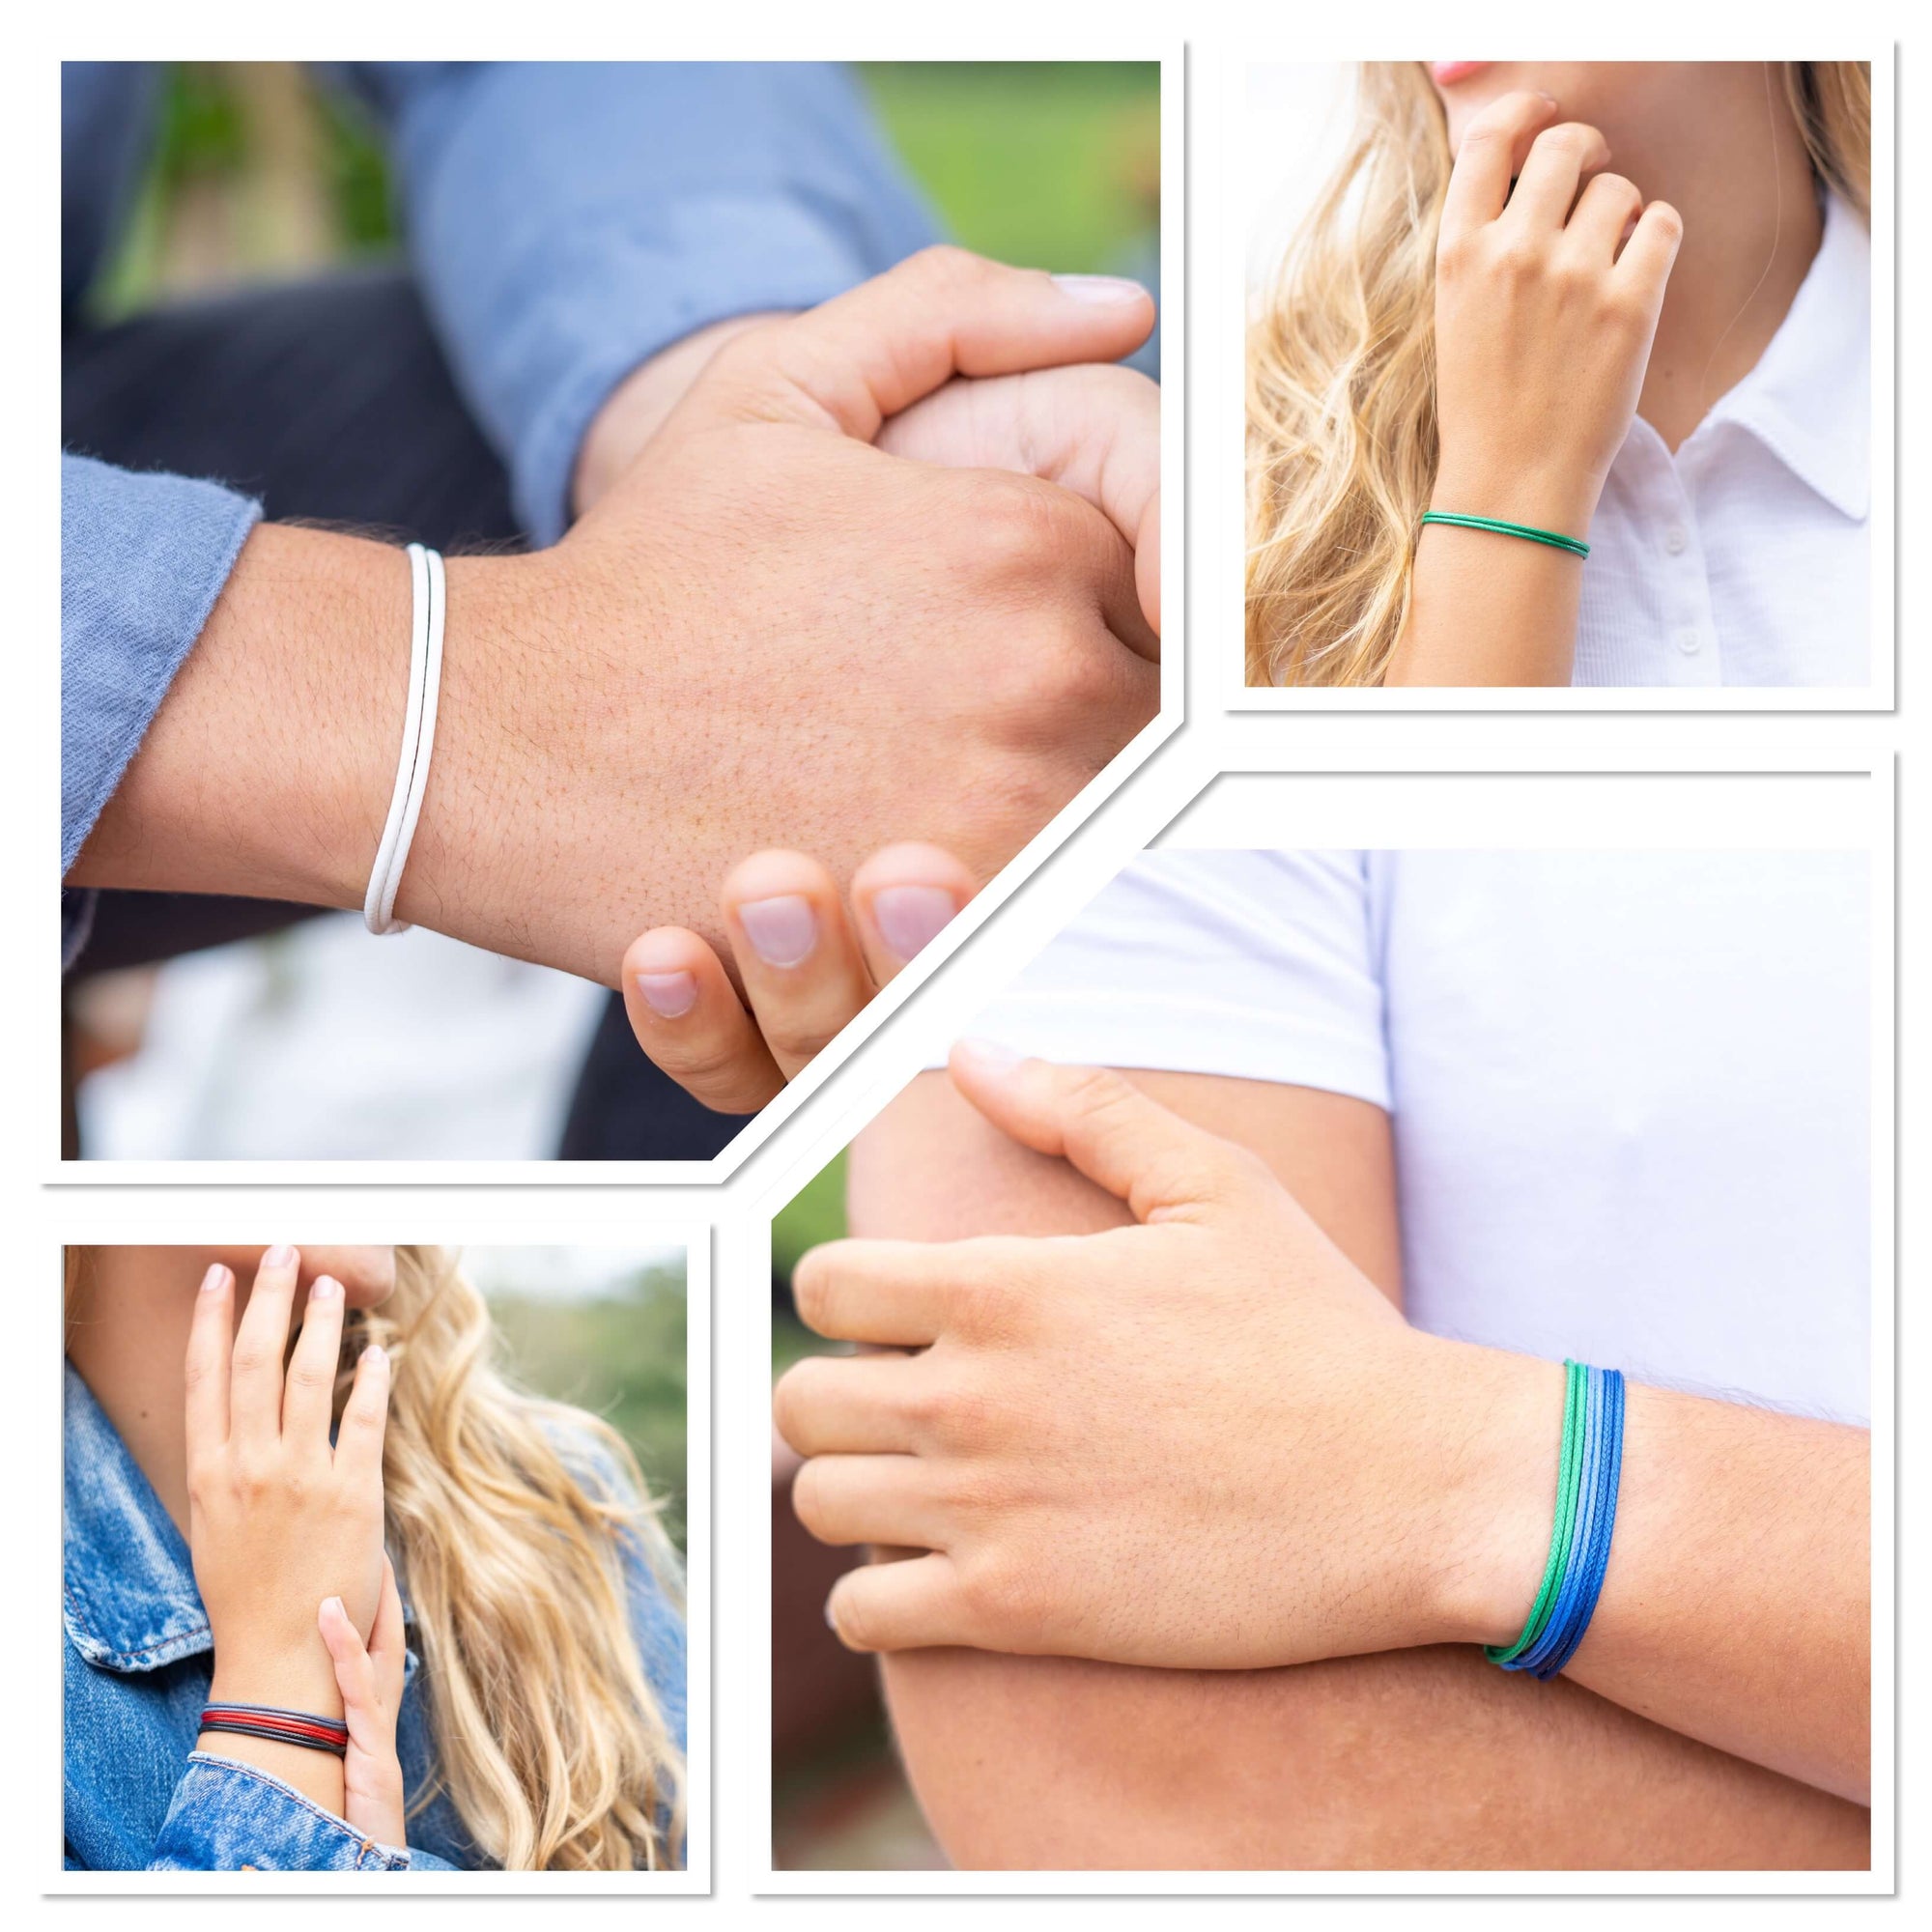 Luck Strings-Collage of people wearing the bracelets: "Collage of people wearing surf wax nylon cord bracelets